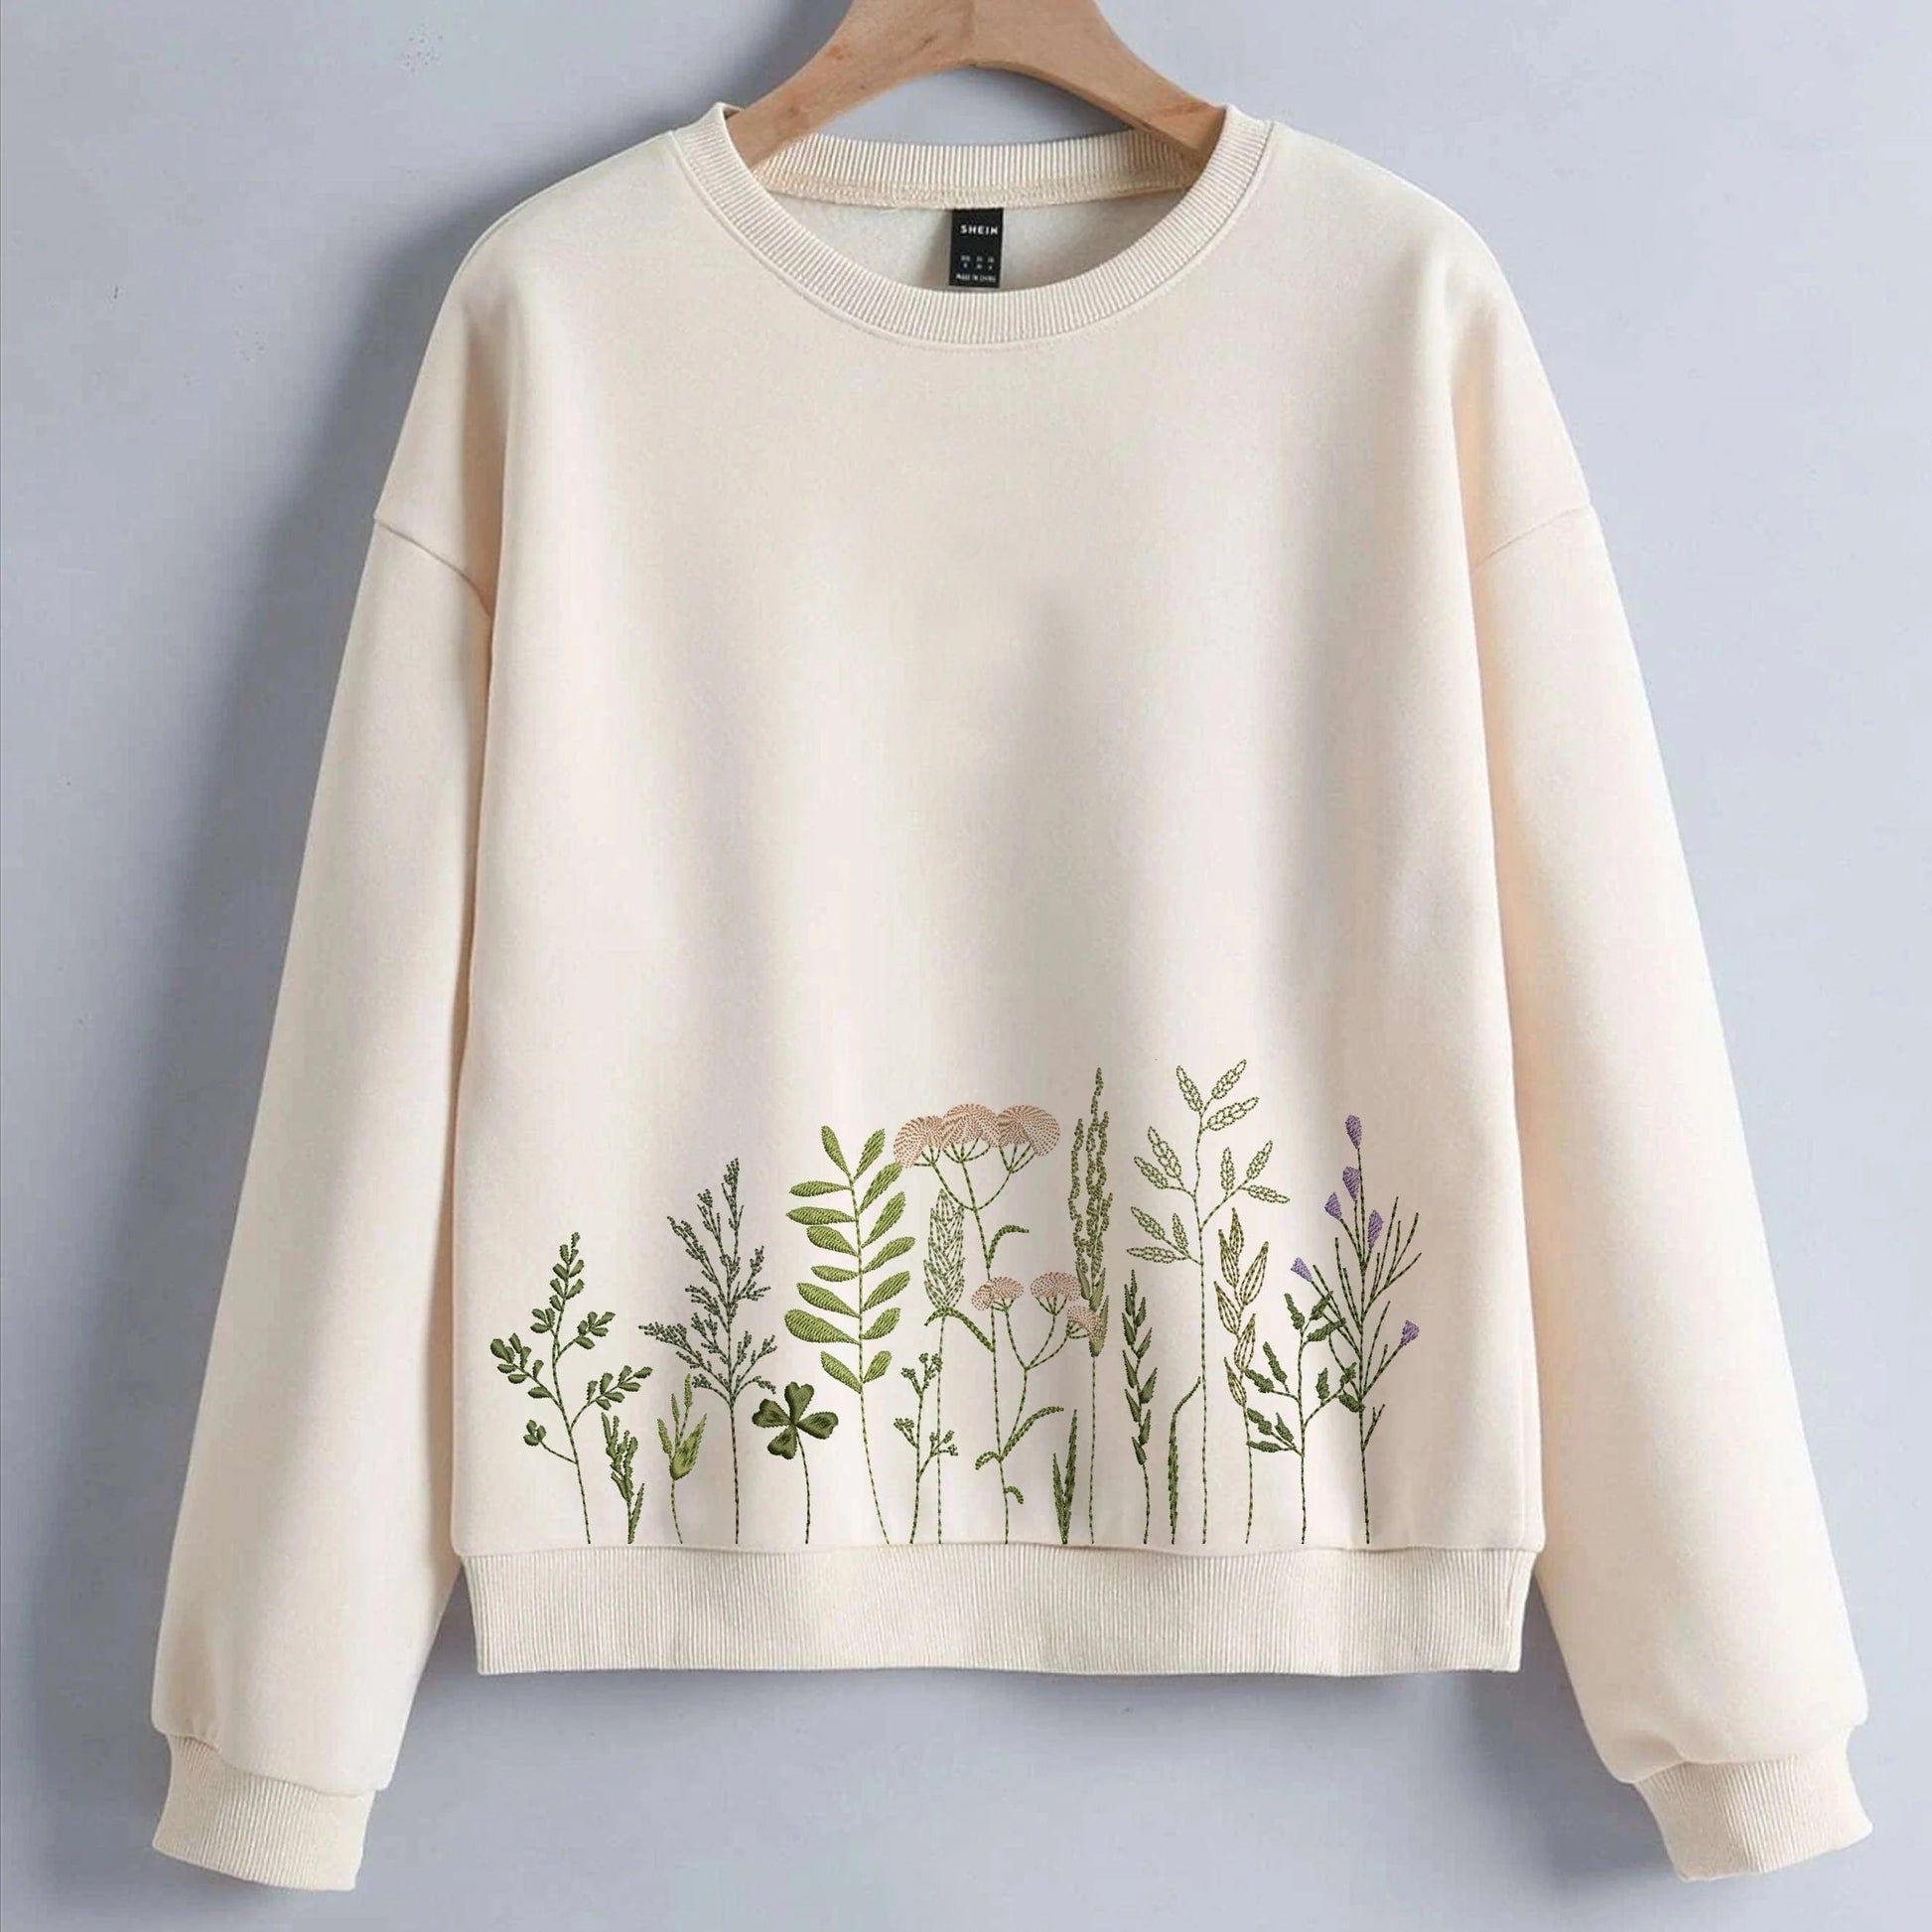 Meadow wildflower machine embroidery design set on blouse or sweat shirt